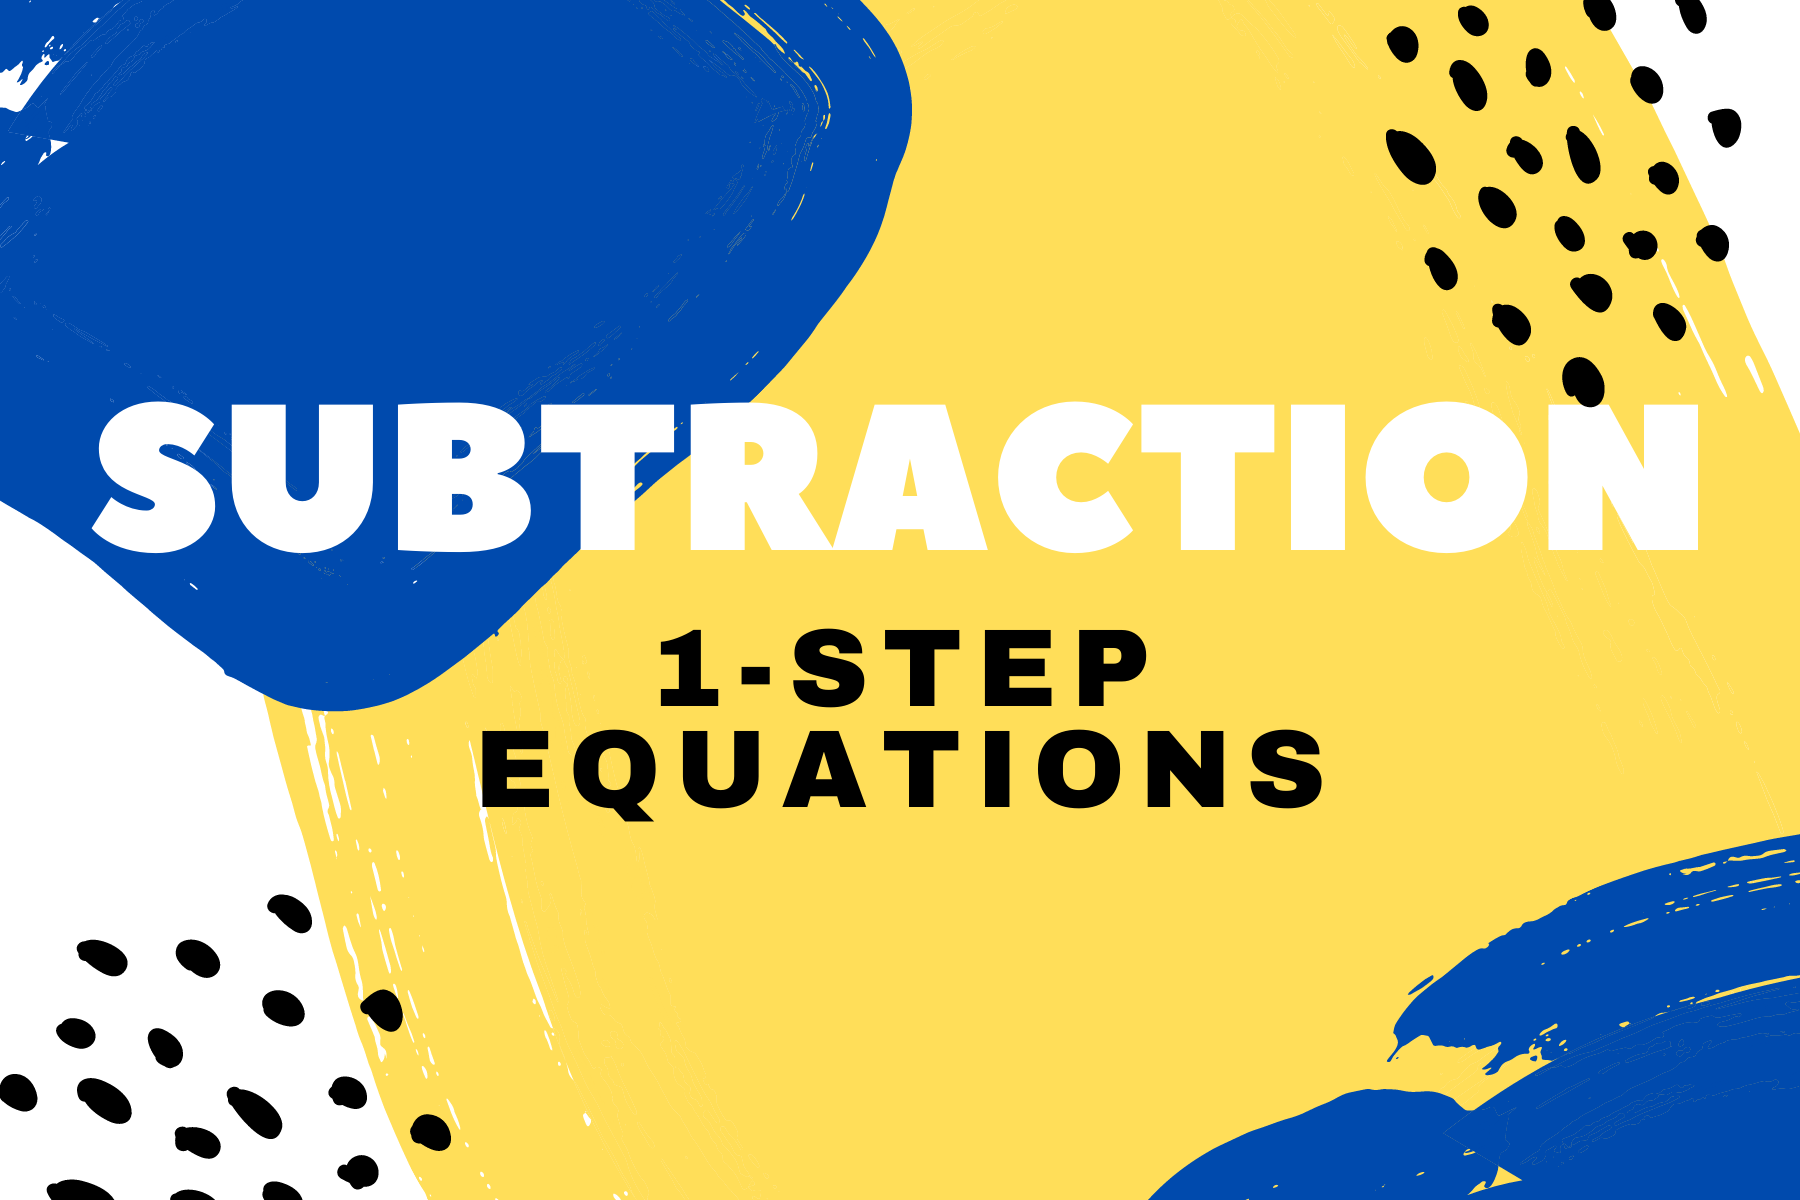 Subtraction and Patterns of One Less - Year 12 - Quizizz